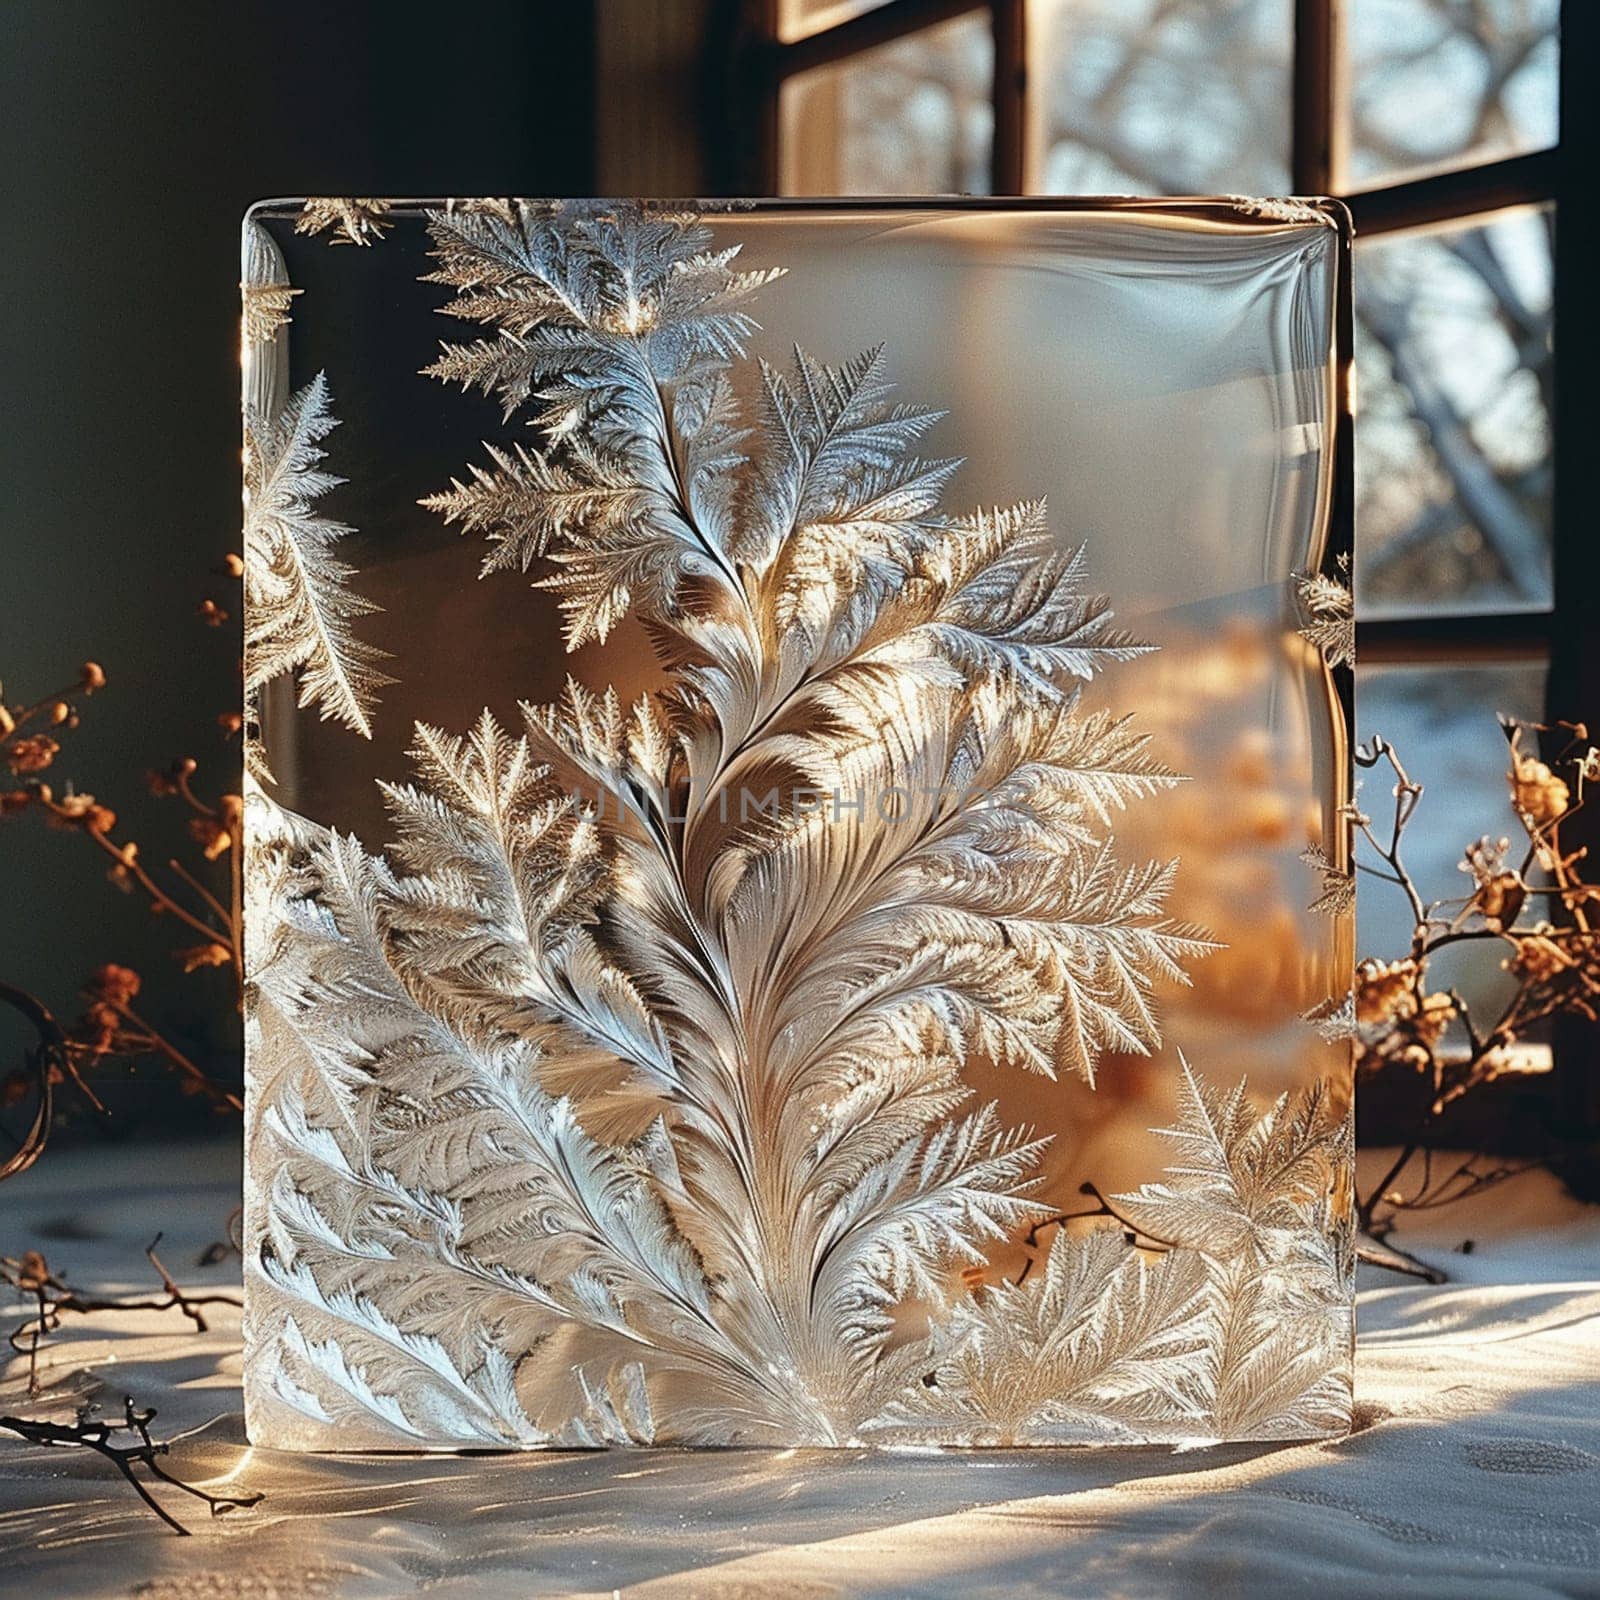 Crystalline structure of frost on glass, capturing winter's delicate and geometric beauty.